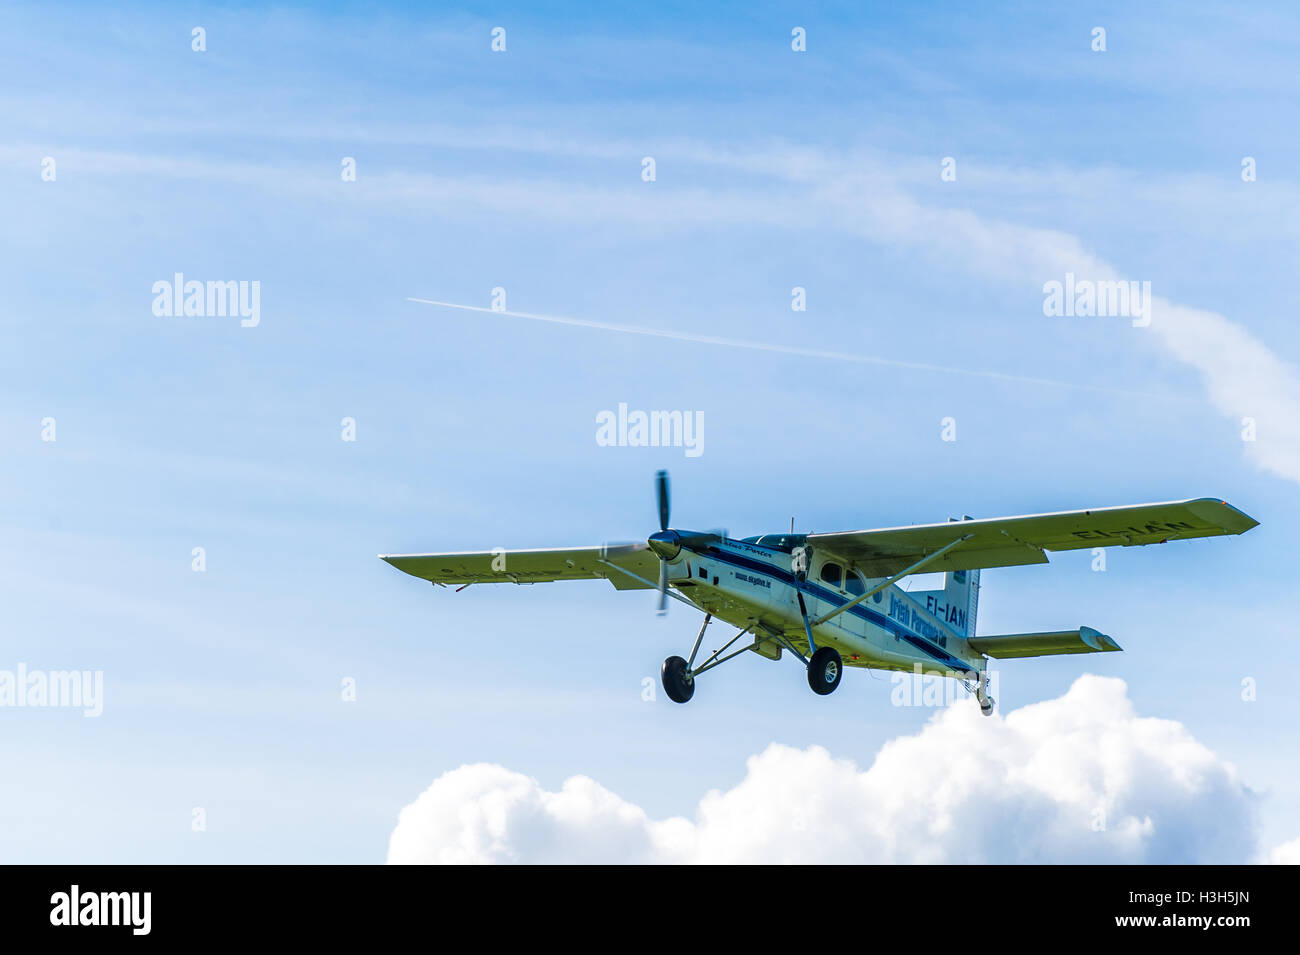 Irish Parachute Club's Pilatus PC-6 Porter takes off full of skydivers in County Offaly, Ireland with copy space. Stock Photo